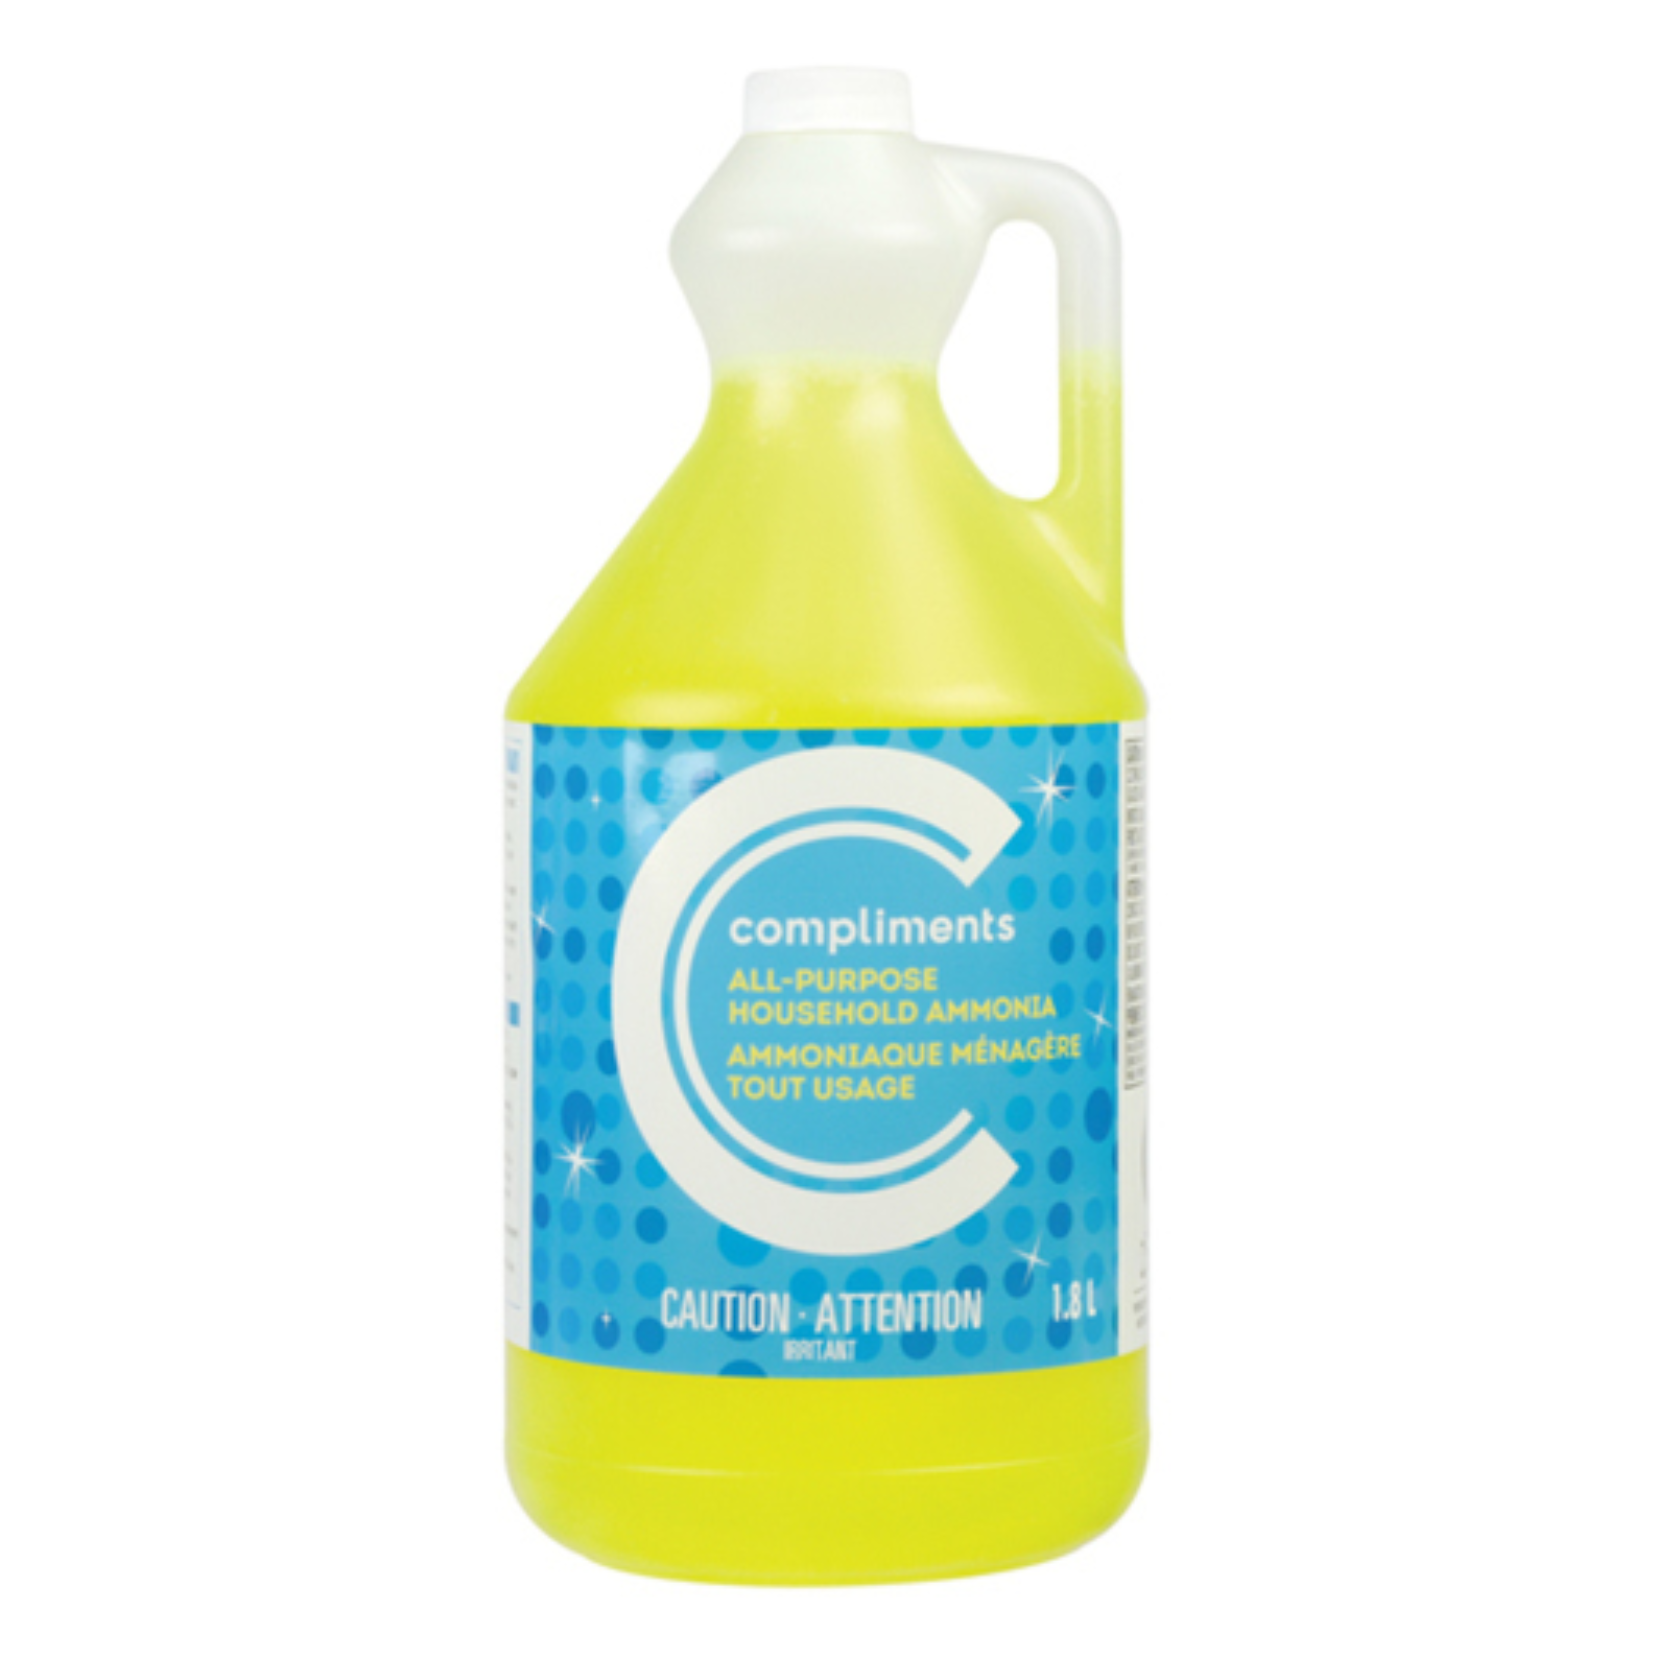 Compliments Ammonia All-Purpose Cleaner 1.8L